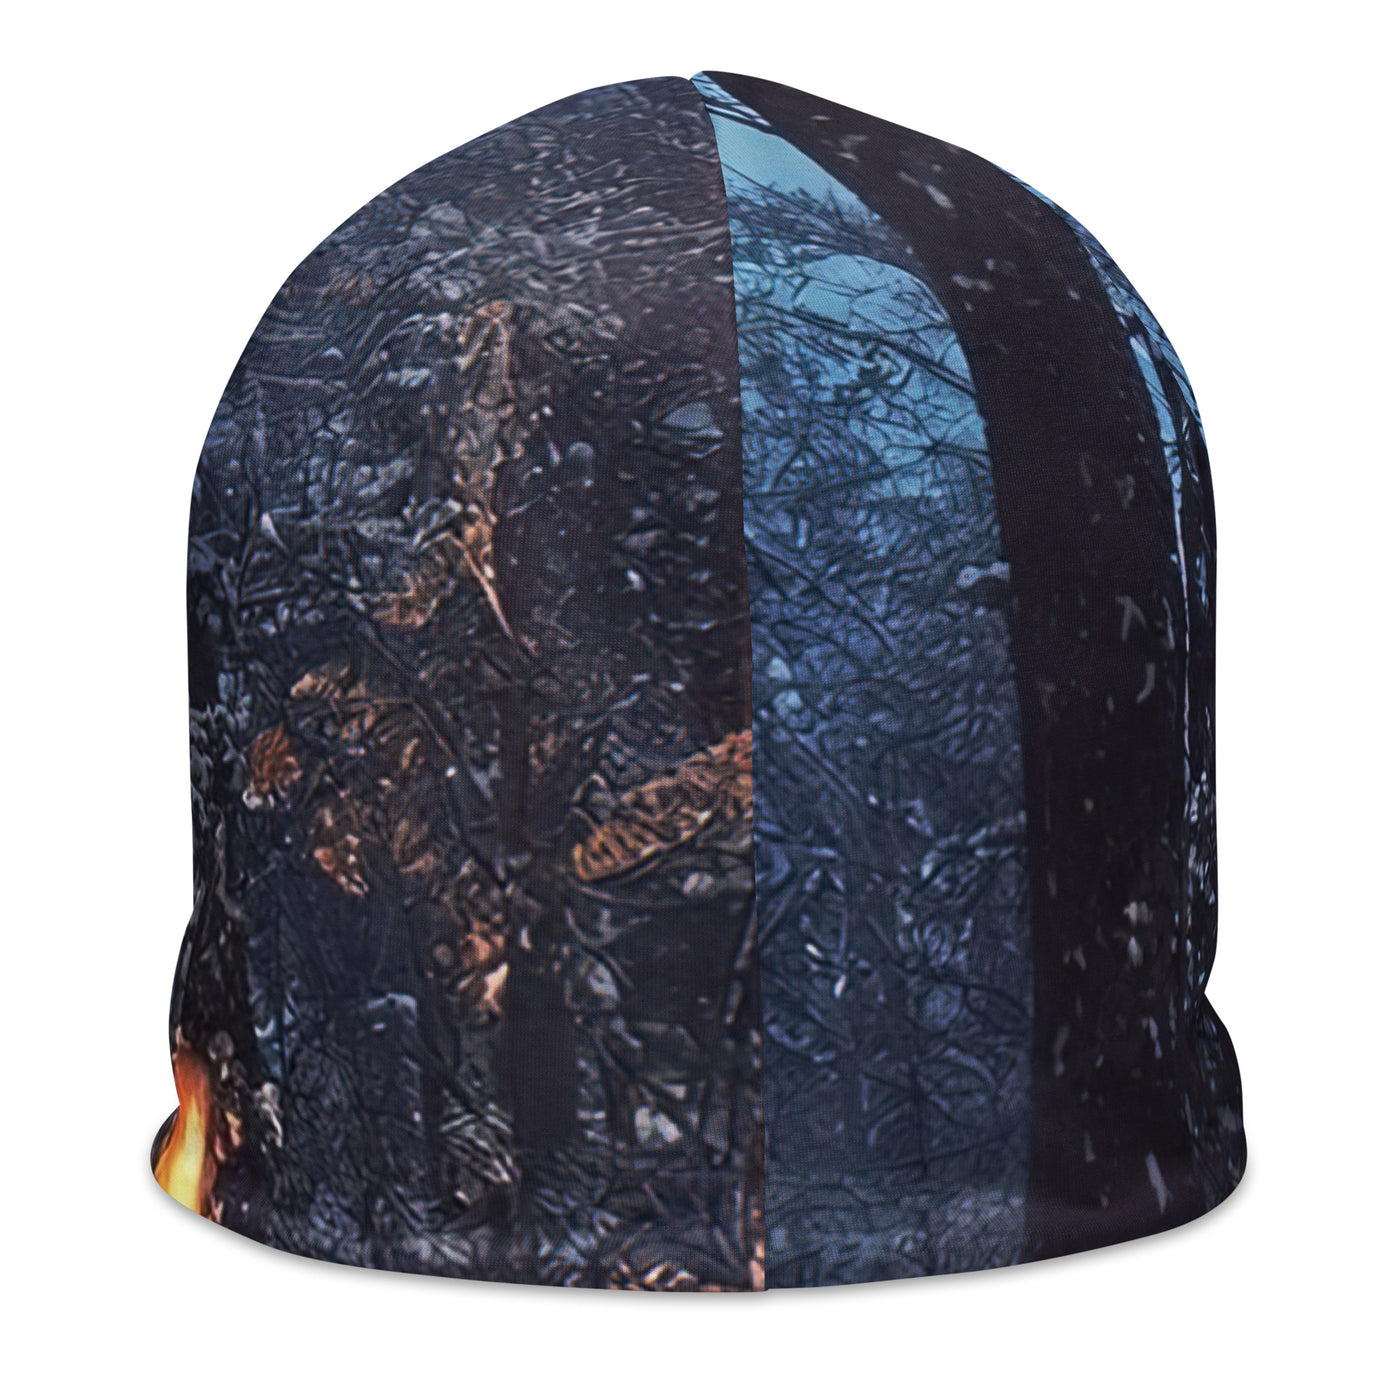 Lagerfeuer im Winter - Camping Foto - Beanie (All-Over Print) camping xxx